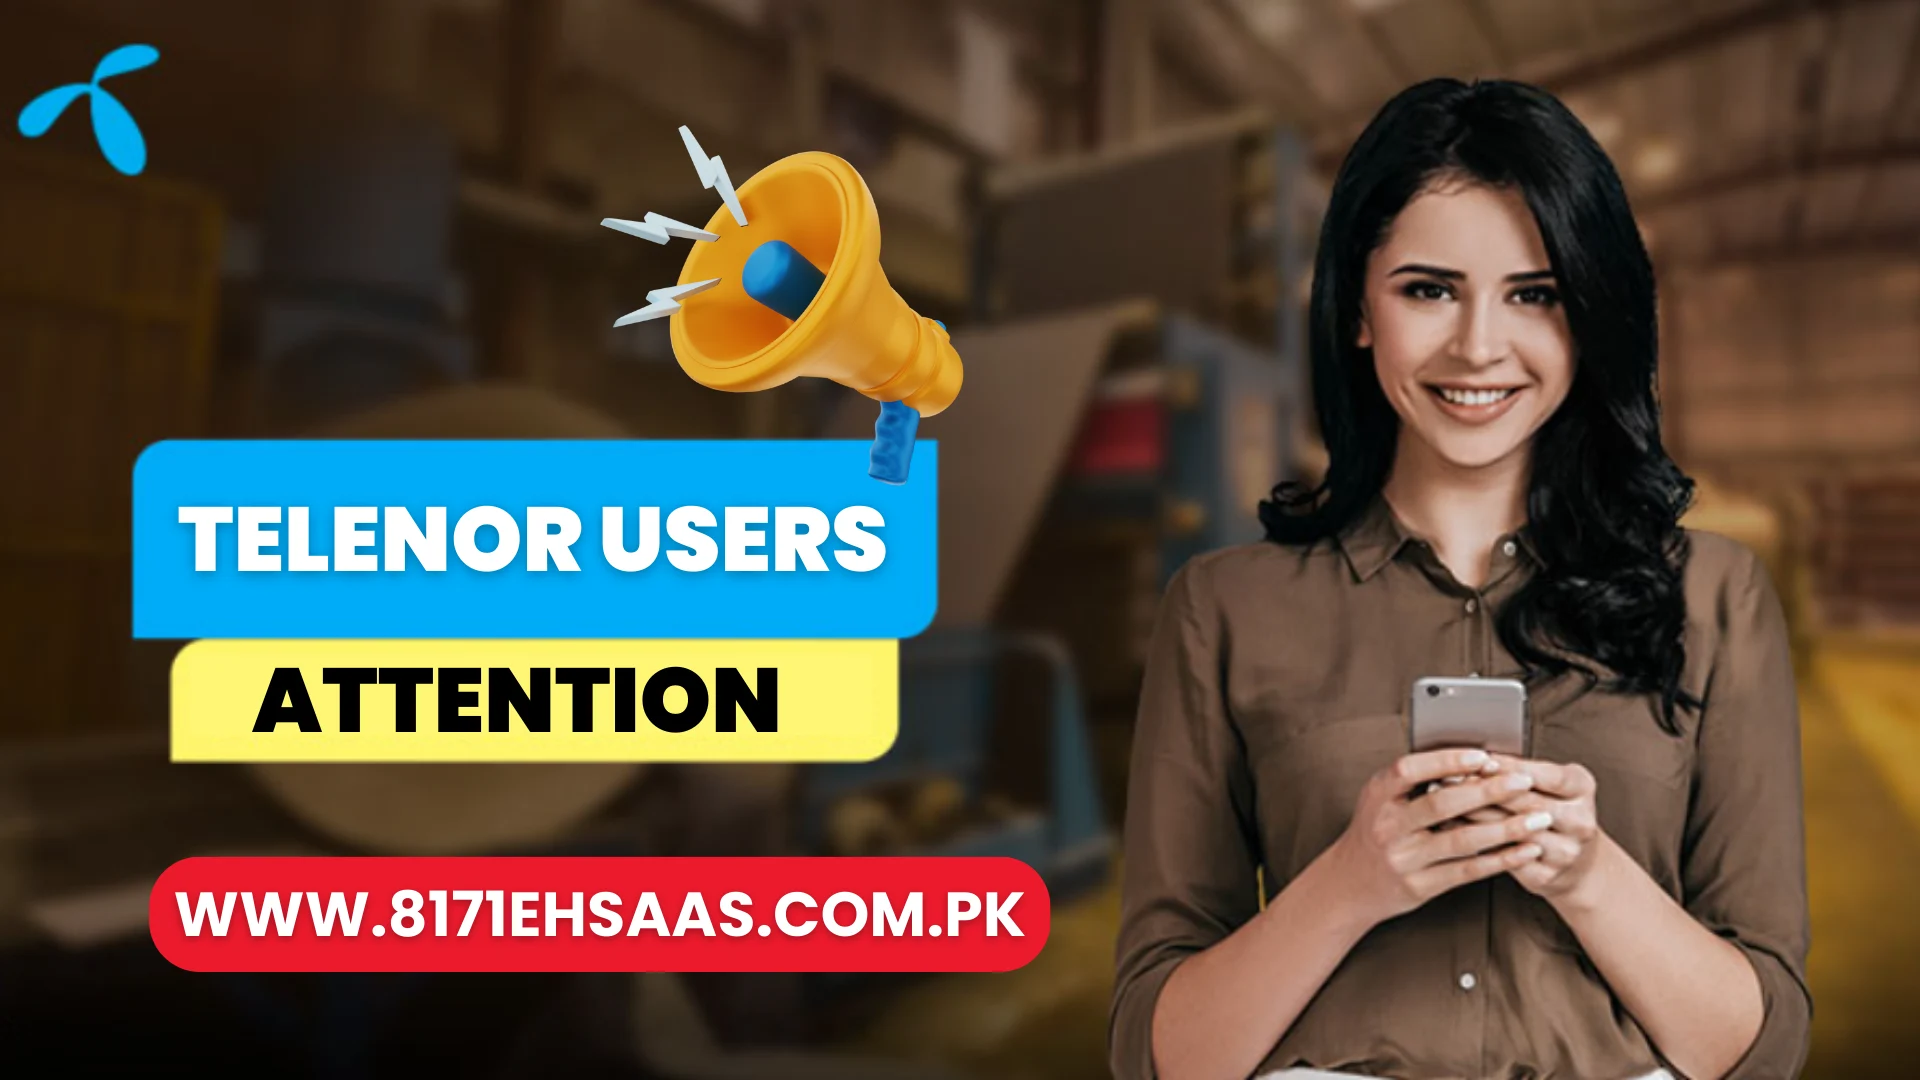 Telenor Users, Attention